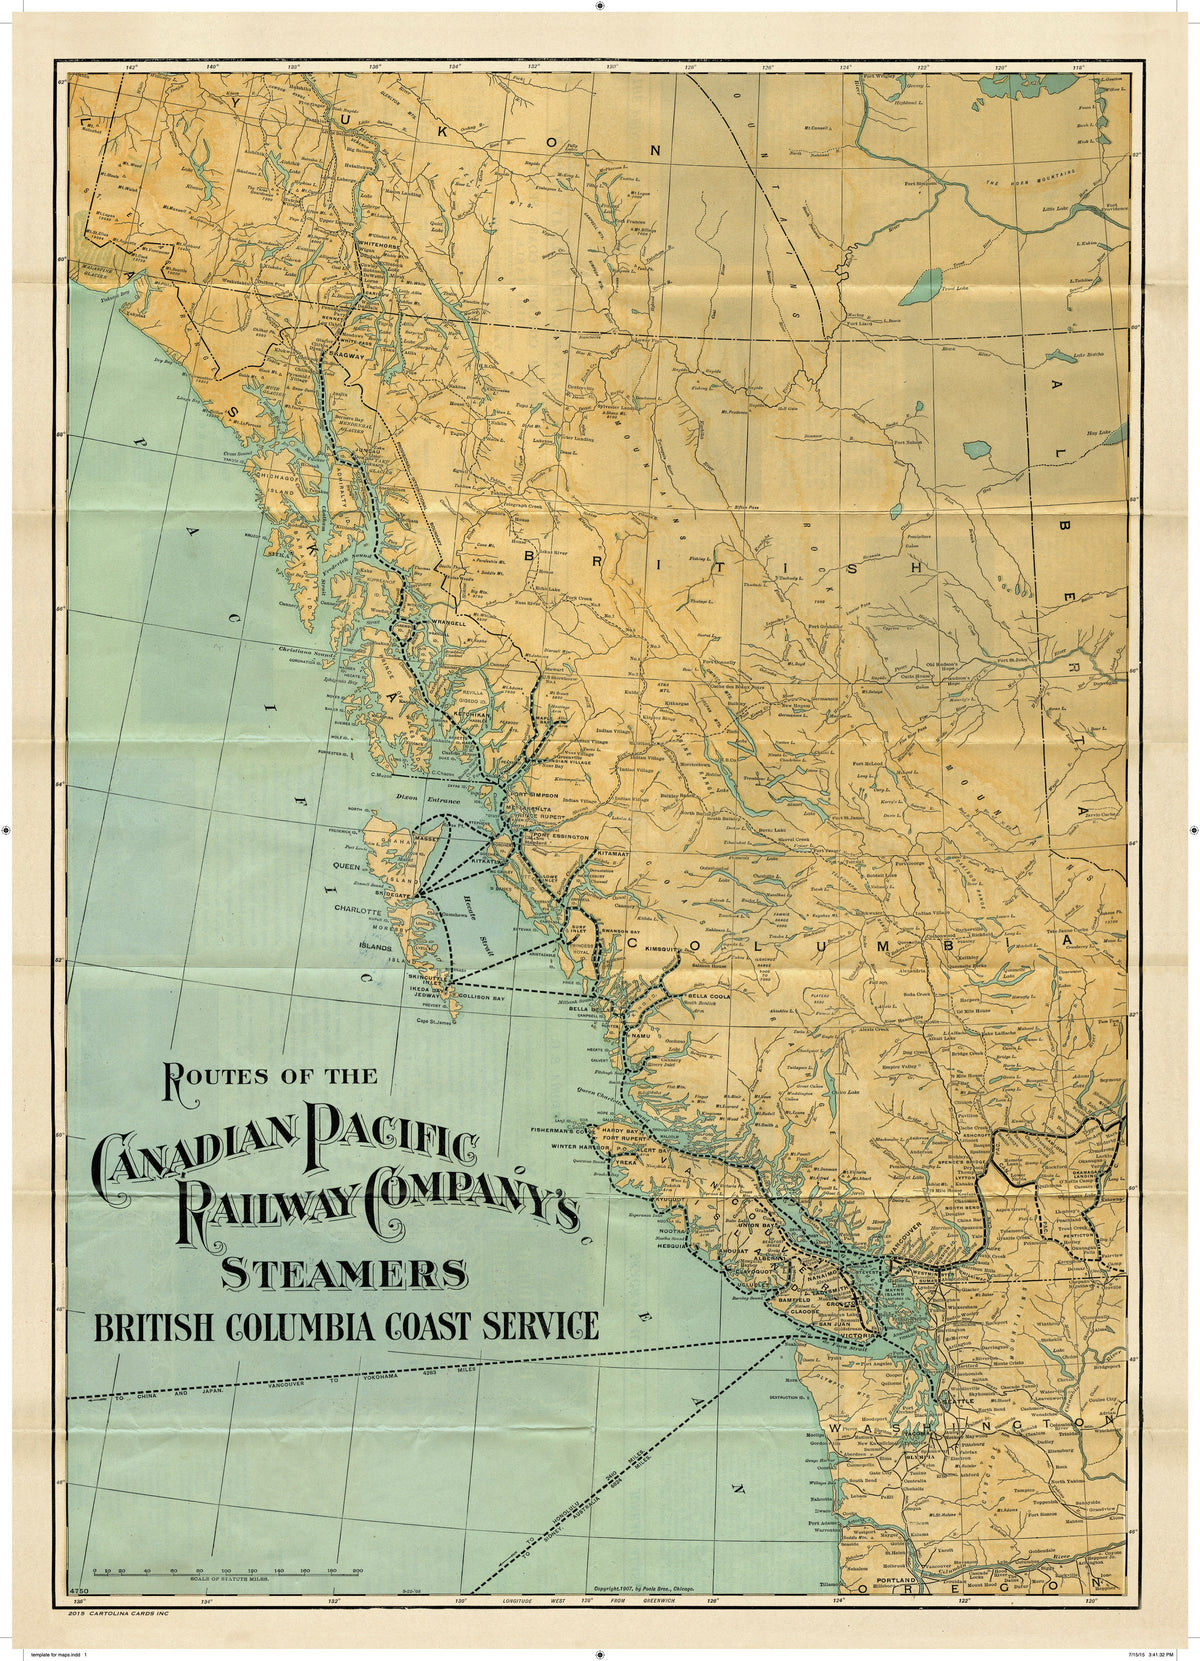 Cartolina Vintage Map - Routes of the Canadian Pacific Railway Company&#39;s Steamers, BC Coast Service